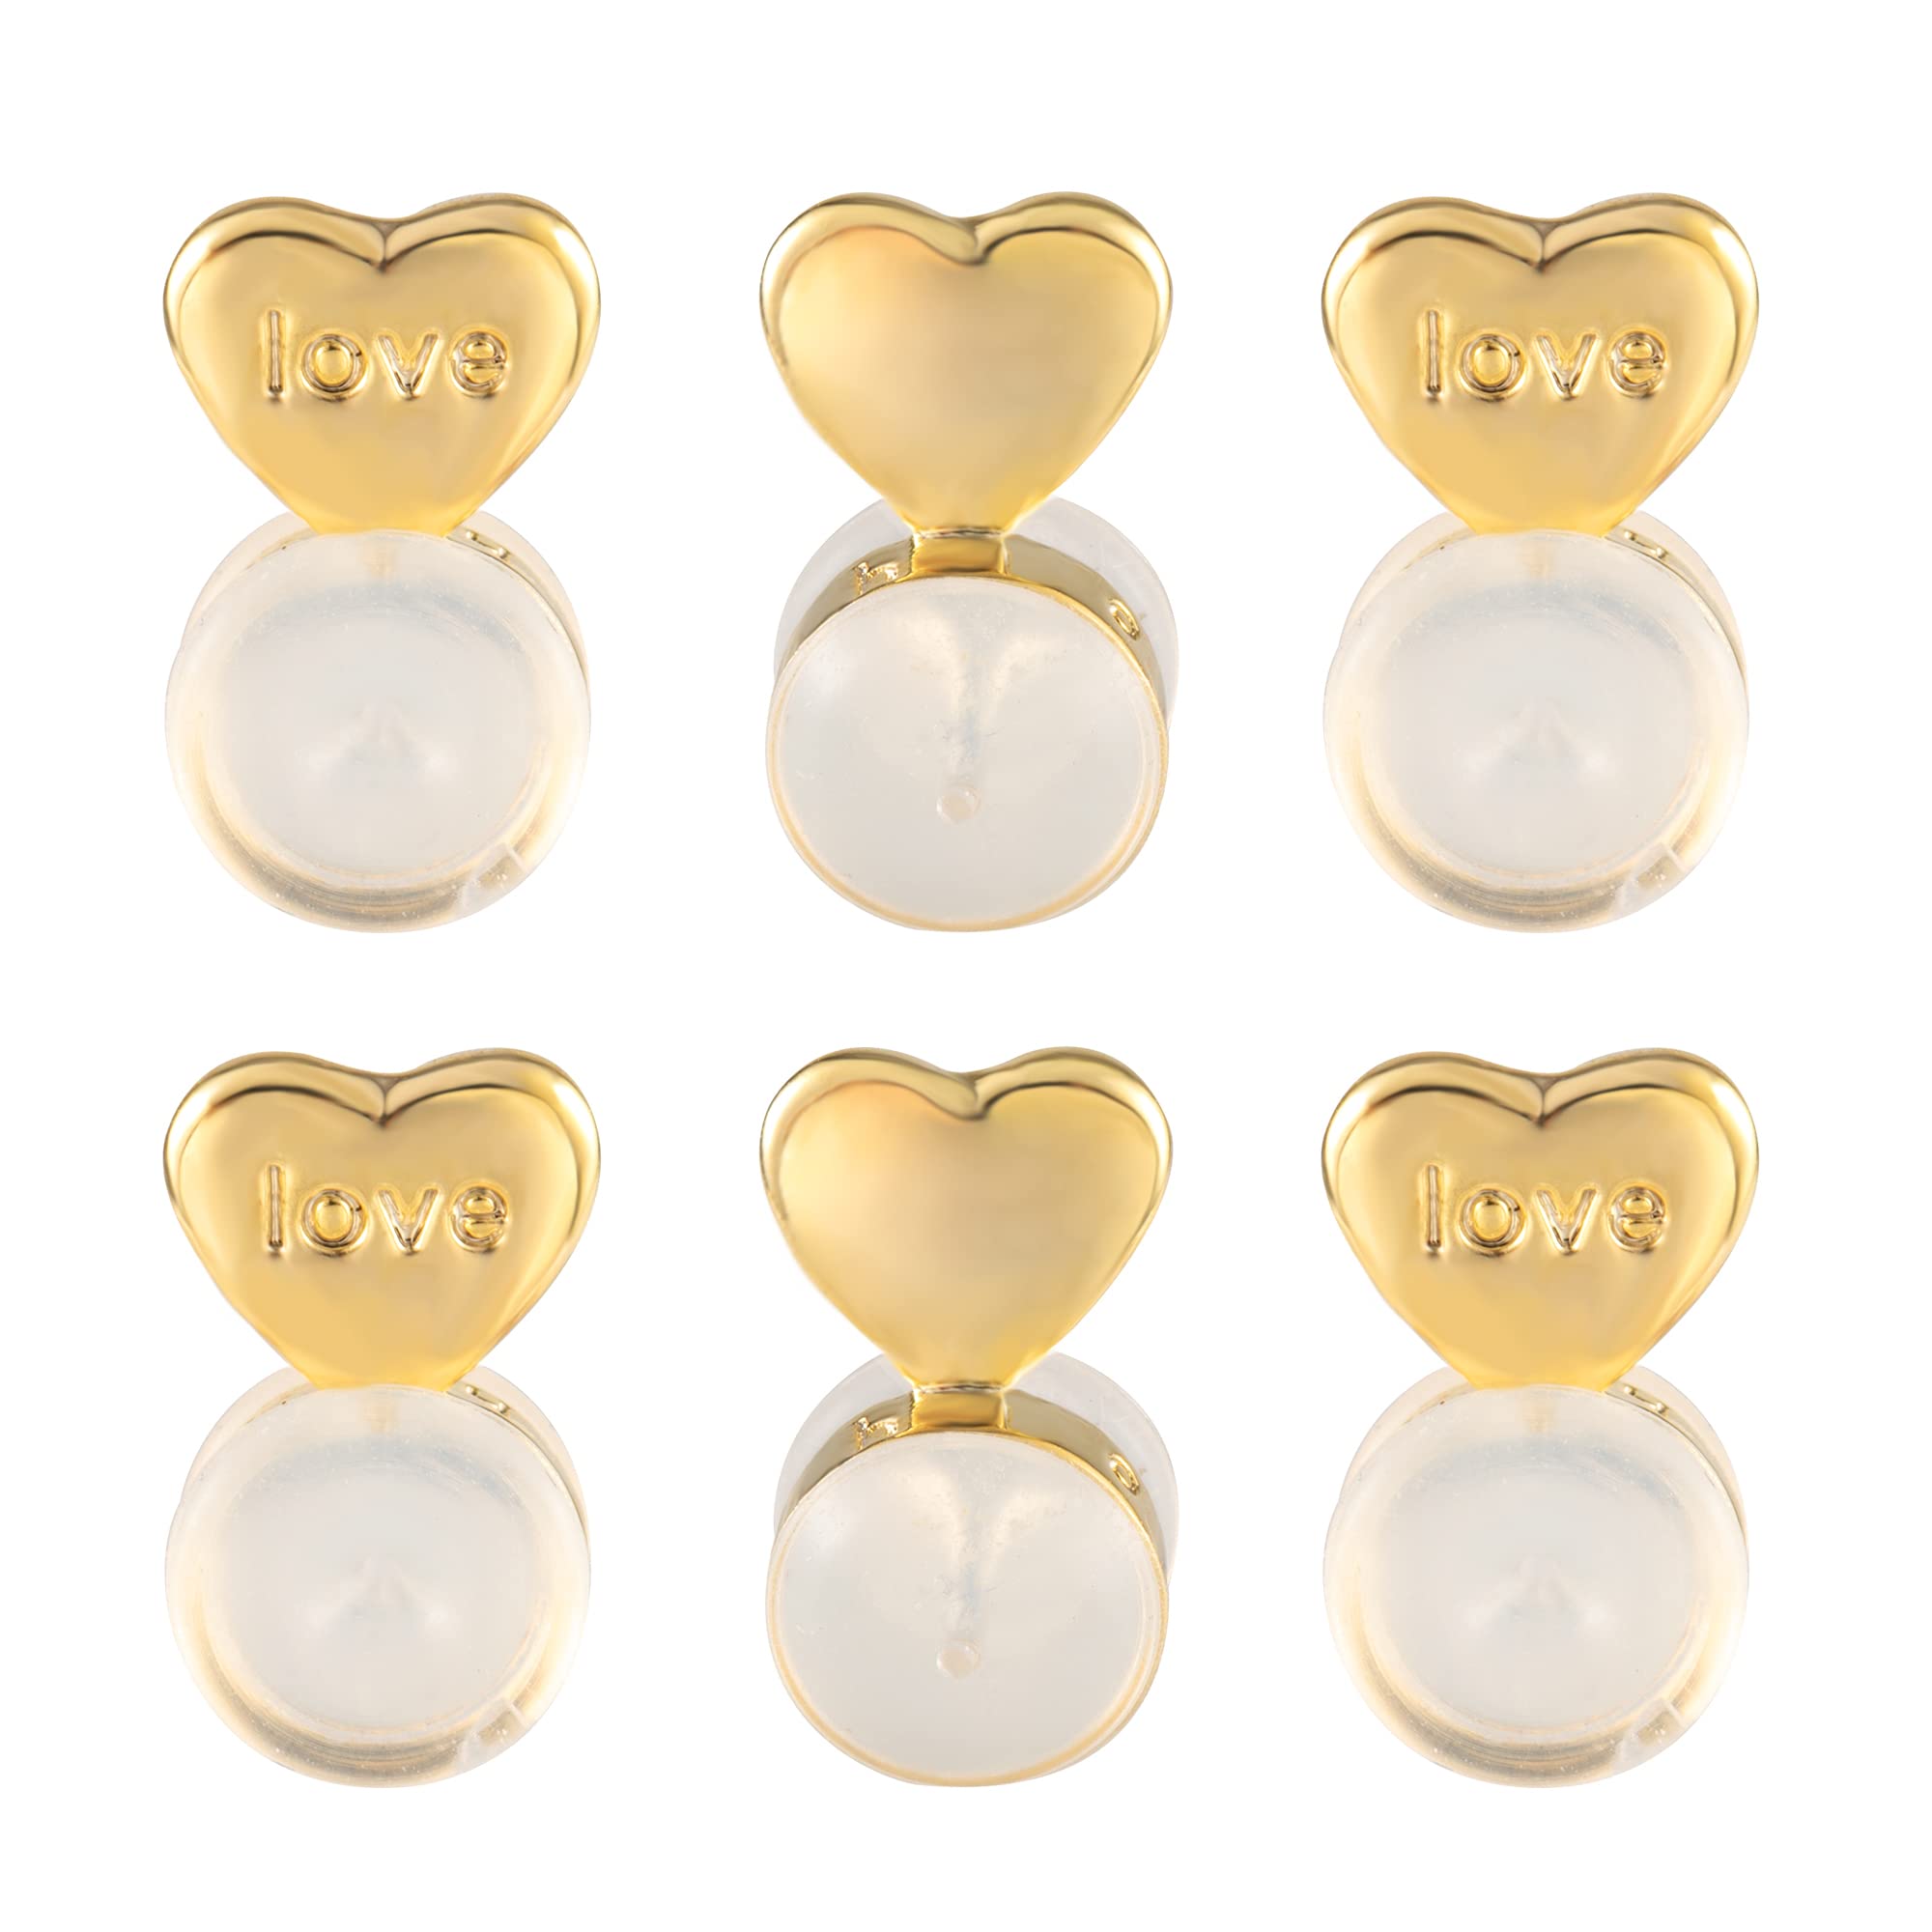 6PCS Heart Silicone Earring Lifter, 14K Gold Plated Love Earring